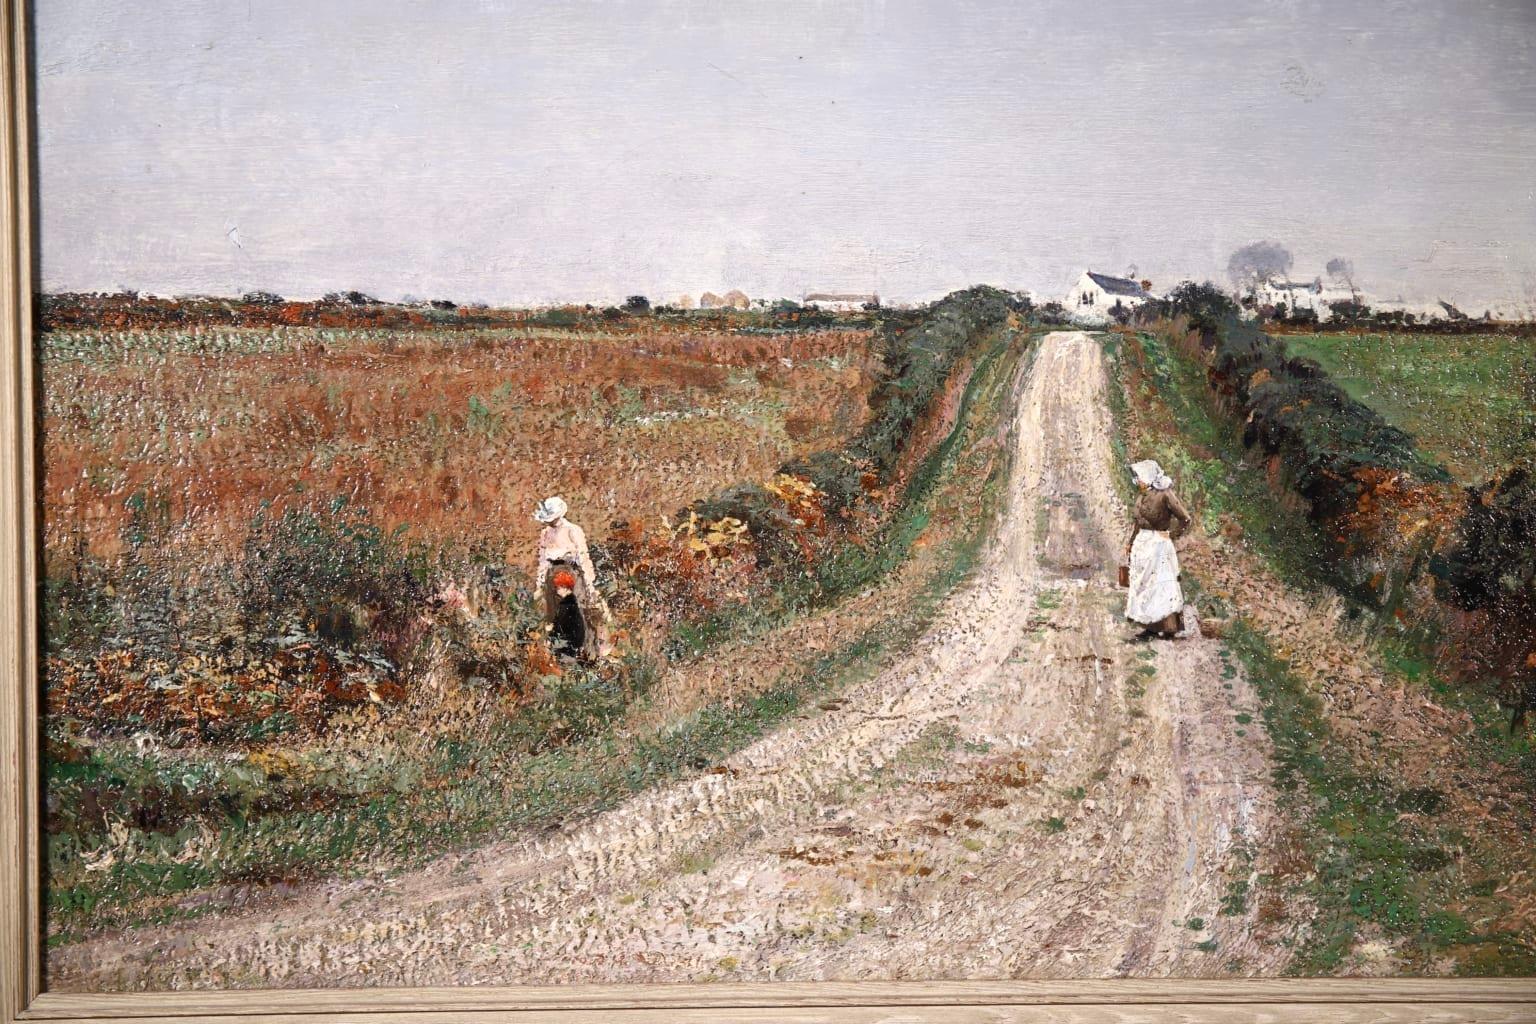 Gathering Wildflowers - Impressionist Oil, Figures in Landscape by WPA Wells - Gray Landscape Painting by William Page Atkinson Wells